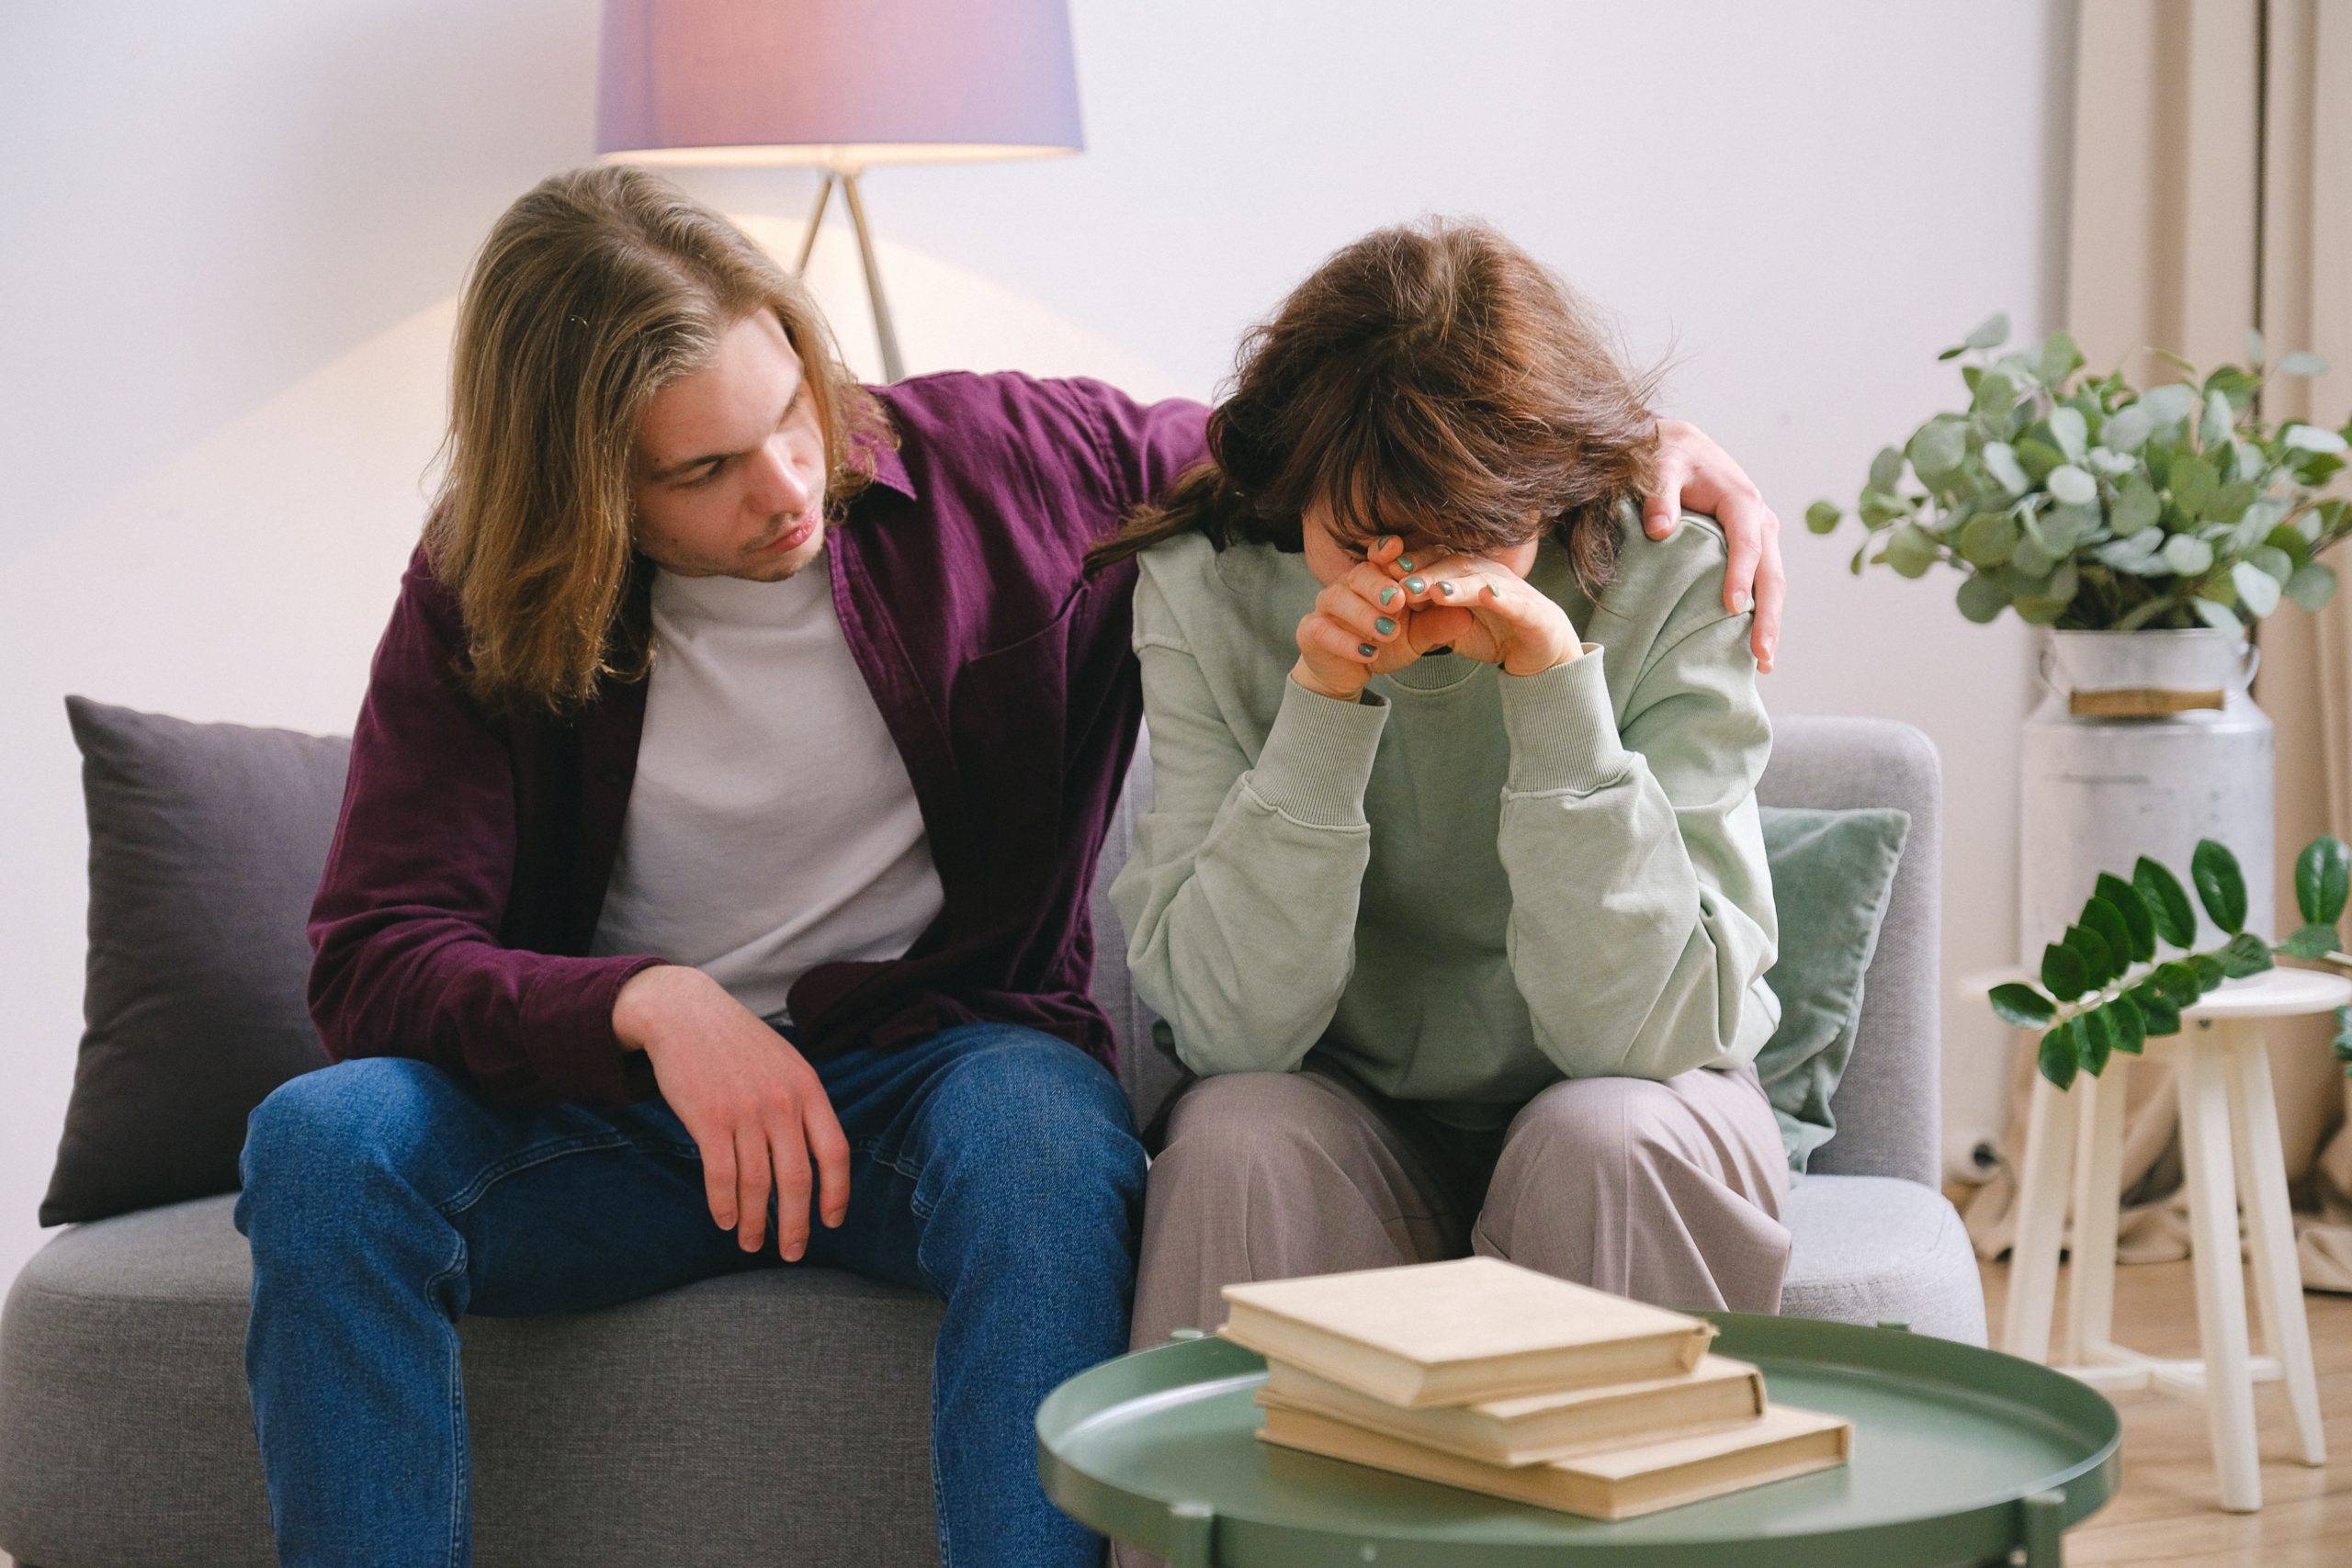 Adult woman sitting on couch in distress, adult man consoling her